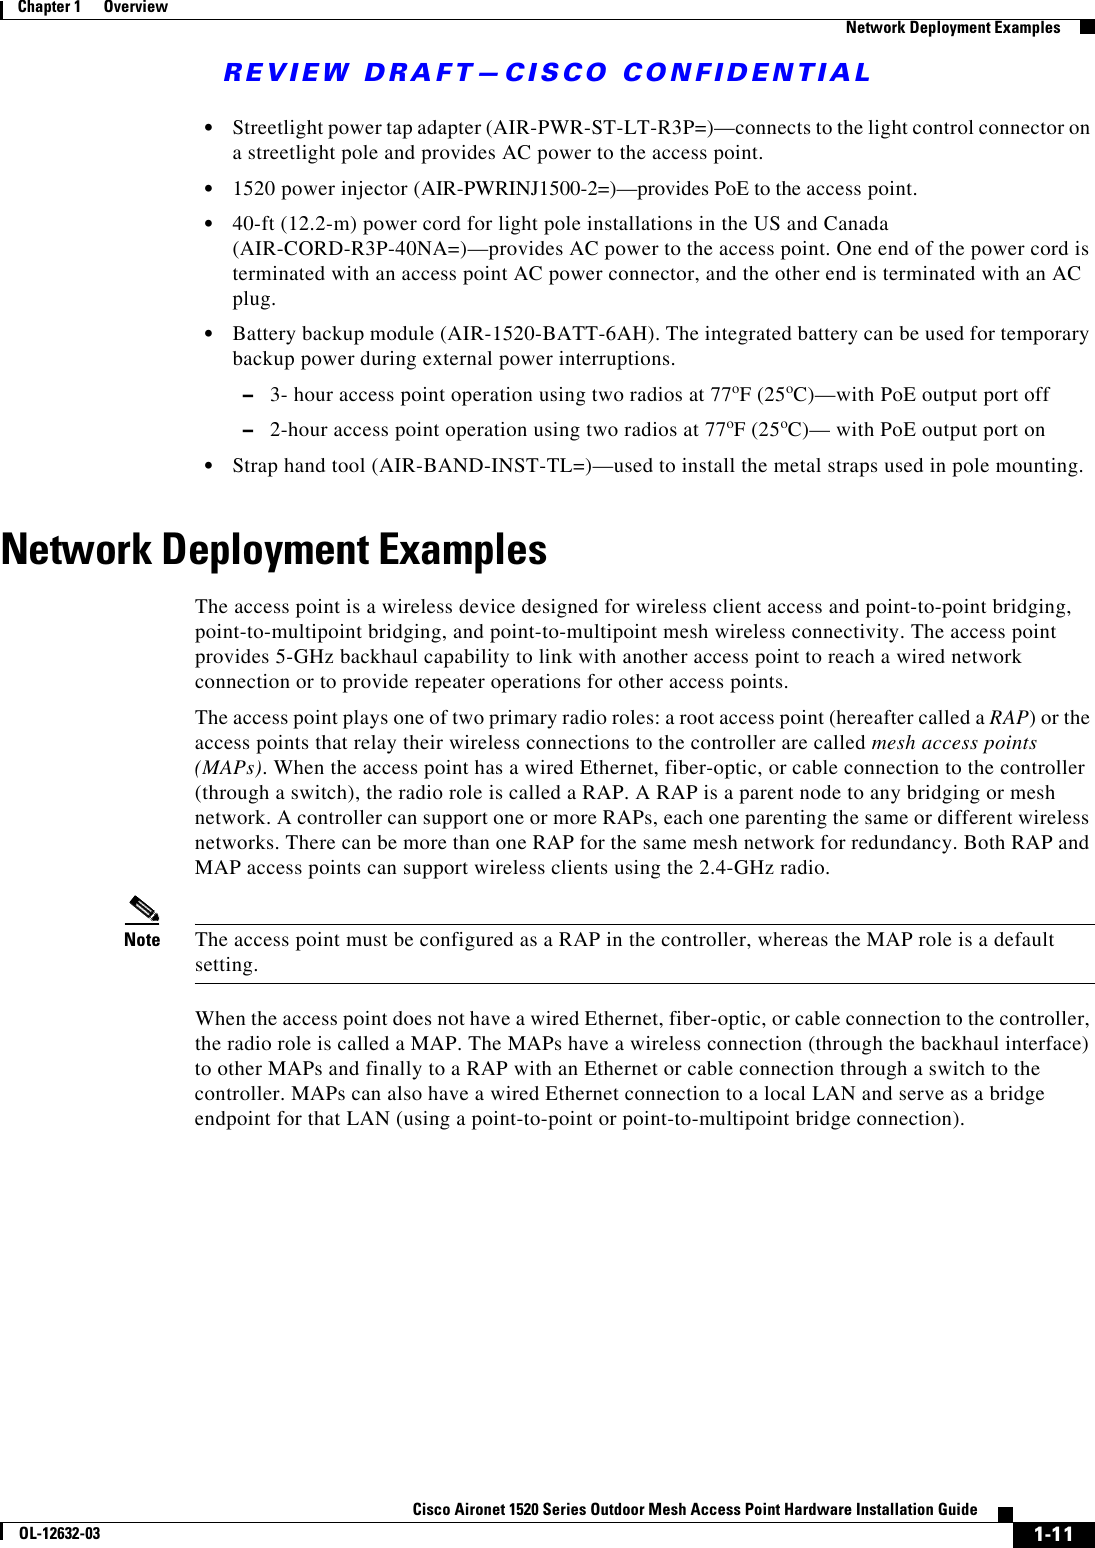 REVIEW DRAFT—CISCO CONFIDENTIAL1-11Cisco Aironet 1520 Series Outdoor Mesh Access Point Hardware Installation GuideOL-12632-03Chapter 1      Overview  Network Deployment Examples  • Streetlight power tap adapter (AIR-PWR-ST-LT-R3P=)—connects to the light control connector on a streetlight pole and provides AC power to the access point.  • 1520 power injector (AIR-PWRINJ1500-2=)—provides PoE to the access point.  • 40-ft (12.2-m) power cord for light pole installations in the US and Canada (AIR-CORD-R3P-40NA=)—provides AC power to the access point. One end of the power cord is terminated with an access point AC power connector, and the other end is terminated with an AC plug.  • Battery backup module (AIR-1520-BATT-6AH). The integrated battery can be used for temporary backup power during external power interruptions.  –3- hour access point operation using two radios at 77oF (25oC)—with PoE output port off  –2-hour access point operation using two radios at 77oF (25oC)— with PoE output port on  • Strap hand tool (AIR-BAND-INST-TL=)—used to install the metal straps used in pole mounting.Network Deployment ExamplesThe access point is a wireless device designed for wireless client access and point-to-point bridging, point-to-multipoint bridging, and point-to-multipoint mesh wireless connectivity. The access point provides 5-GHz backhaul capability to link with another access point to reach a wired network connection or to provide repeater operations for other access points. The access point plays one of two primary radio roles: a root access point (hereafter called a RAP) or the access points that relay their wireless connections to the controller are called mesh access points (MAPs). When the access point has a wired Ethernet, fiber-optic, or cable connection to the controller (through a switch), the radio role is called a RAP. A RAP is a parent node to any bridging or mesh network. A controller can support one or more RAPs, each one parenting the same or different wireless networks. There can be more than one RAP for the same mesh network for redundancy. Both RAP and MAP access points can support wireless clients using the 2.4-GHz radio.Note The access point must be configured as a RAP in the controller, whereas the MAP role is a default setting.When the access point does not have a wired Ethernet, fiber-optic, or cable connection to the controller, the radio role is called a MAP. The MAPs have a wireless connection (through the backhaul interface) to other MAPs and finally to a RAP with an Ethernet or cable connection through a switch to the controller. MAPs can also have a wired Ethernet connection to a local LAN and serve as a bridge endpoint for that LAN (using a point-to-point or point-to-multipoint bridge connection). 